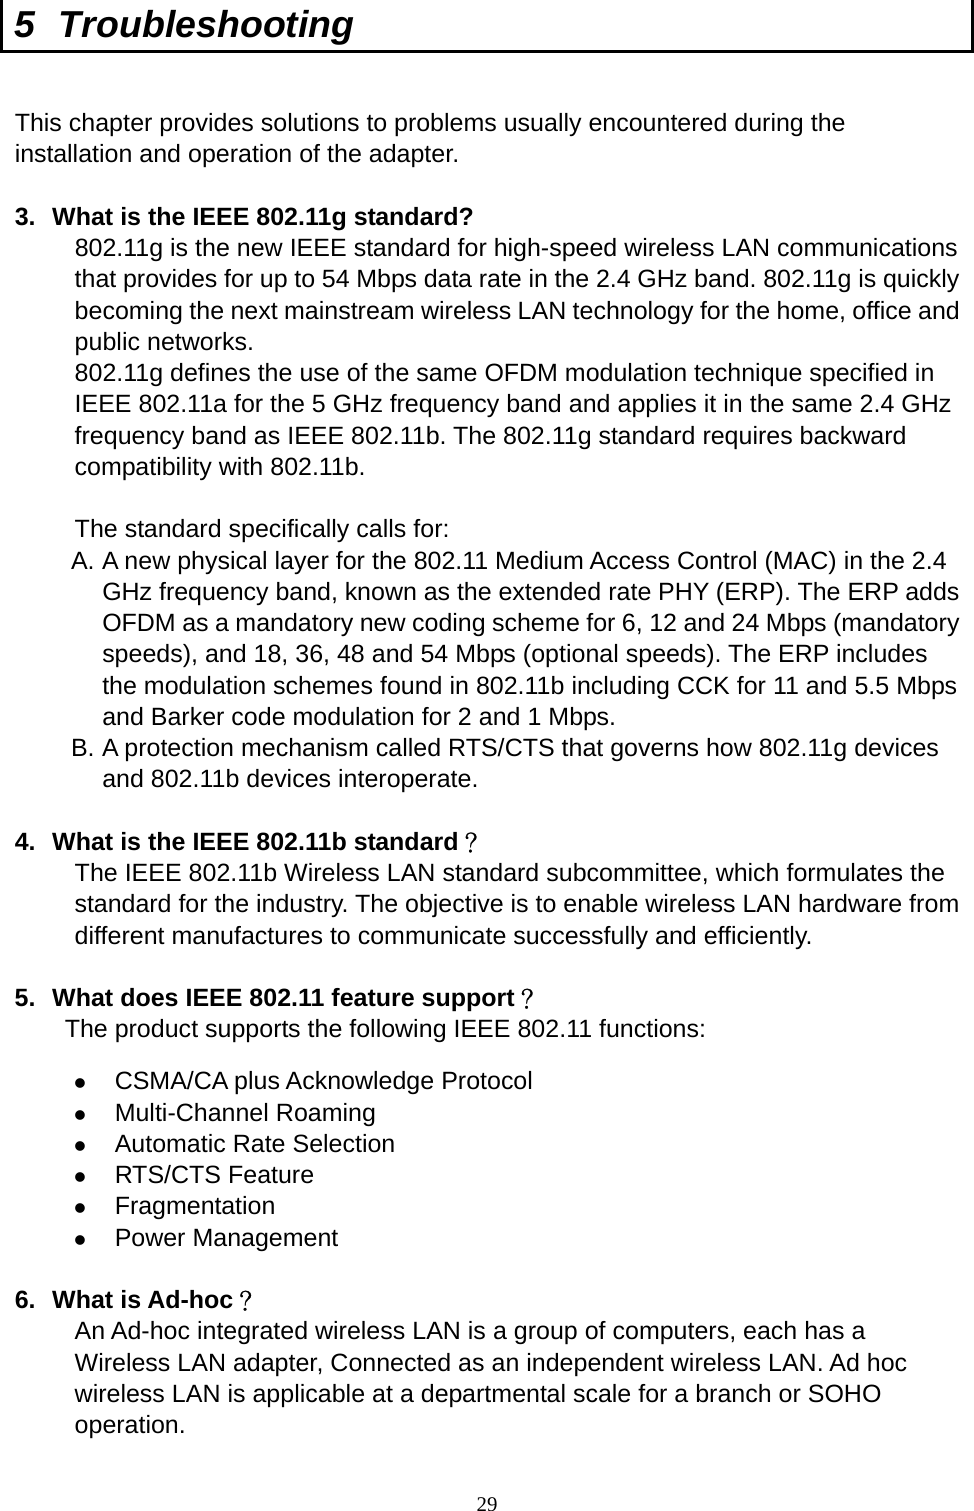  29 5 Troubleshooting  This chapter provides solutions to problems usually encountered during the installation and operation of the adapter.    3.  What is the IEEE 802.11g standard? 802.11g is the new IEEE standard for high-speed wireless LAN communications that provides for up to 54 Mbps data rate in the 2.4 GHz band. 802.11g is quickly becoming the next mainstream wireless LAN technology for the home, office and public networks.   802.11g defines the use of the same OFDM modulation technique specified in IEEE 802.11a for the 5 GHz frequency band and applies it in the same 2.4 GHz frequency band as IEEE 802.11b. The 802.11g standard requires backward compatibility with 802.11b.  The standard specifically calls for:   A. A new physical layer for the 802.11 Medium Access Control (MAC) in the 2.4 GHz frequency band, known as the extended rate PHY (ERP). The ERP adds OFDM as a mandatory new coding scheme for 6, 12 and 24 Mbps (mandatory speeds), and 18, 36, 48 and 54 Mbps (optional speeds). The ERP includes the modulation schemes found in 802.11b including CCK for 11 and 5.5 Mbps and Barker code modulation for 2 and 1 Mbps. B. A protection mechanism called RTS/CTS that governs how 802.11g devices and 802.11b devices interoperate.  4.  What is the IEEE 802.11b standard？ The IEEE 802.11b Wireless LAN standard subcommittee, which formulates the standard for the industry. The objective is to enable wireless LAN hardware from different manufactures to communicate successfully and efficiently.  5.  What does IEEE 802.11 feature support？ The product supports the following IEEE 802.11 functions:   CSMA/CA plus Acknowledge Protocol   Multi-Channel Roaming   Automatic Rate Selection   RTS/CTS Feature   Fragmentation   Power Management  6. What is Ad-hoc？ An Ad-hoc integrated wireless LAN is a group of computers, each has a Wireless LAN adapter, Connected as an independent wireless LAN. Ad hoc wireless LAN is applicable at a departmental scale for a branch or SOHO operation.  